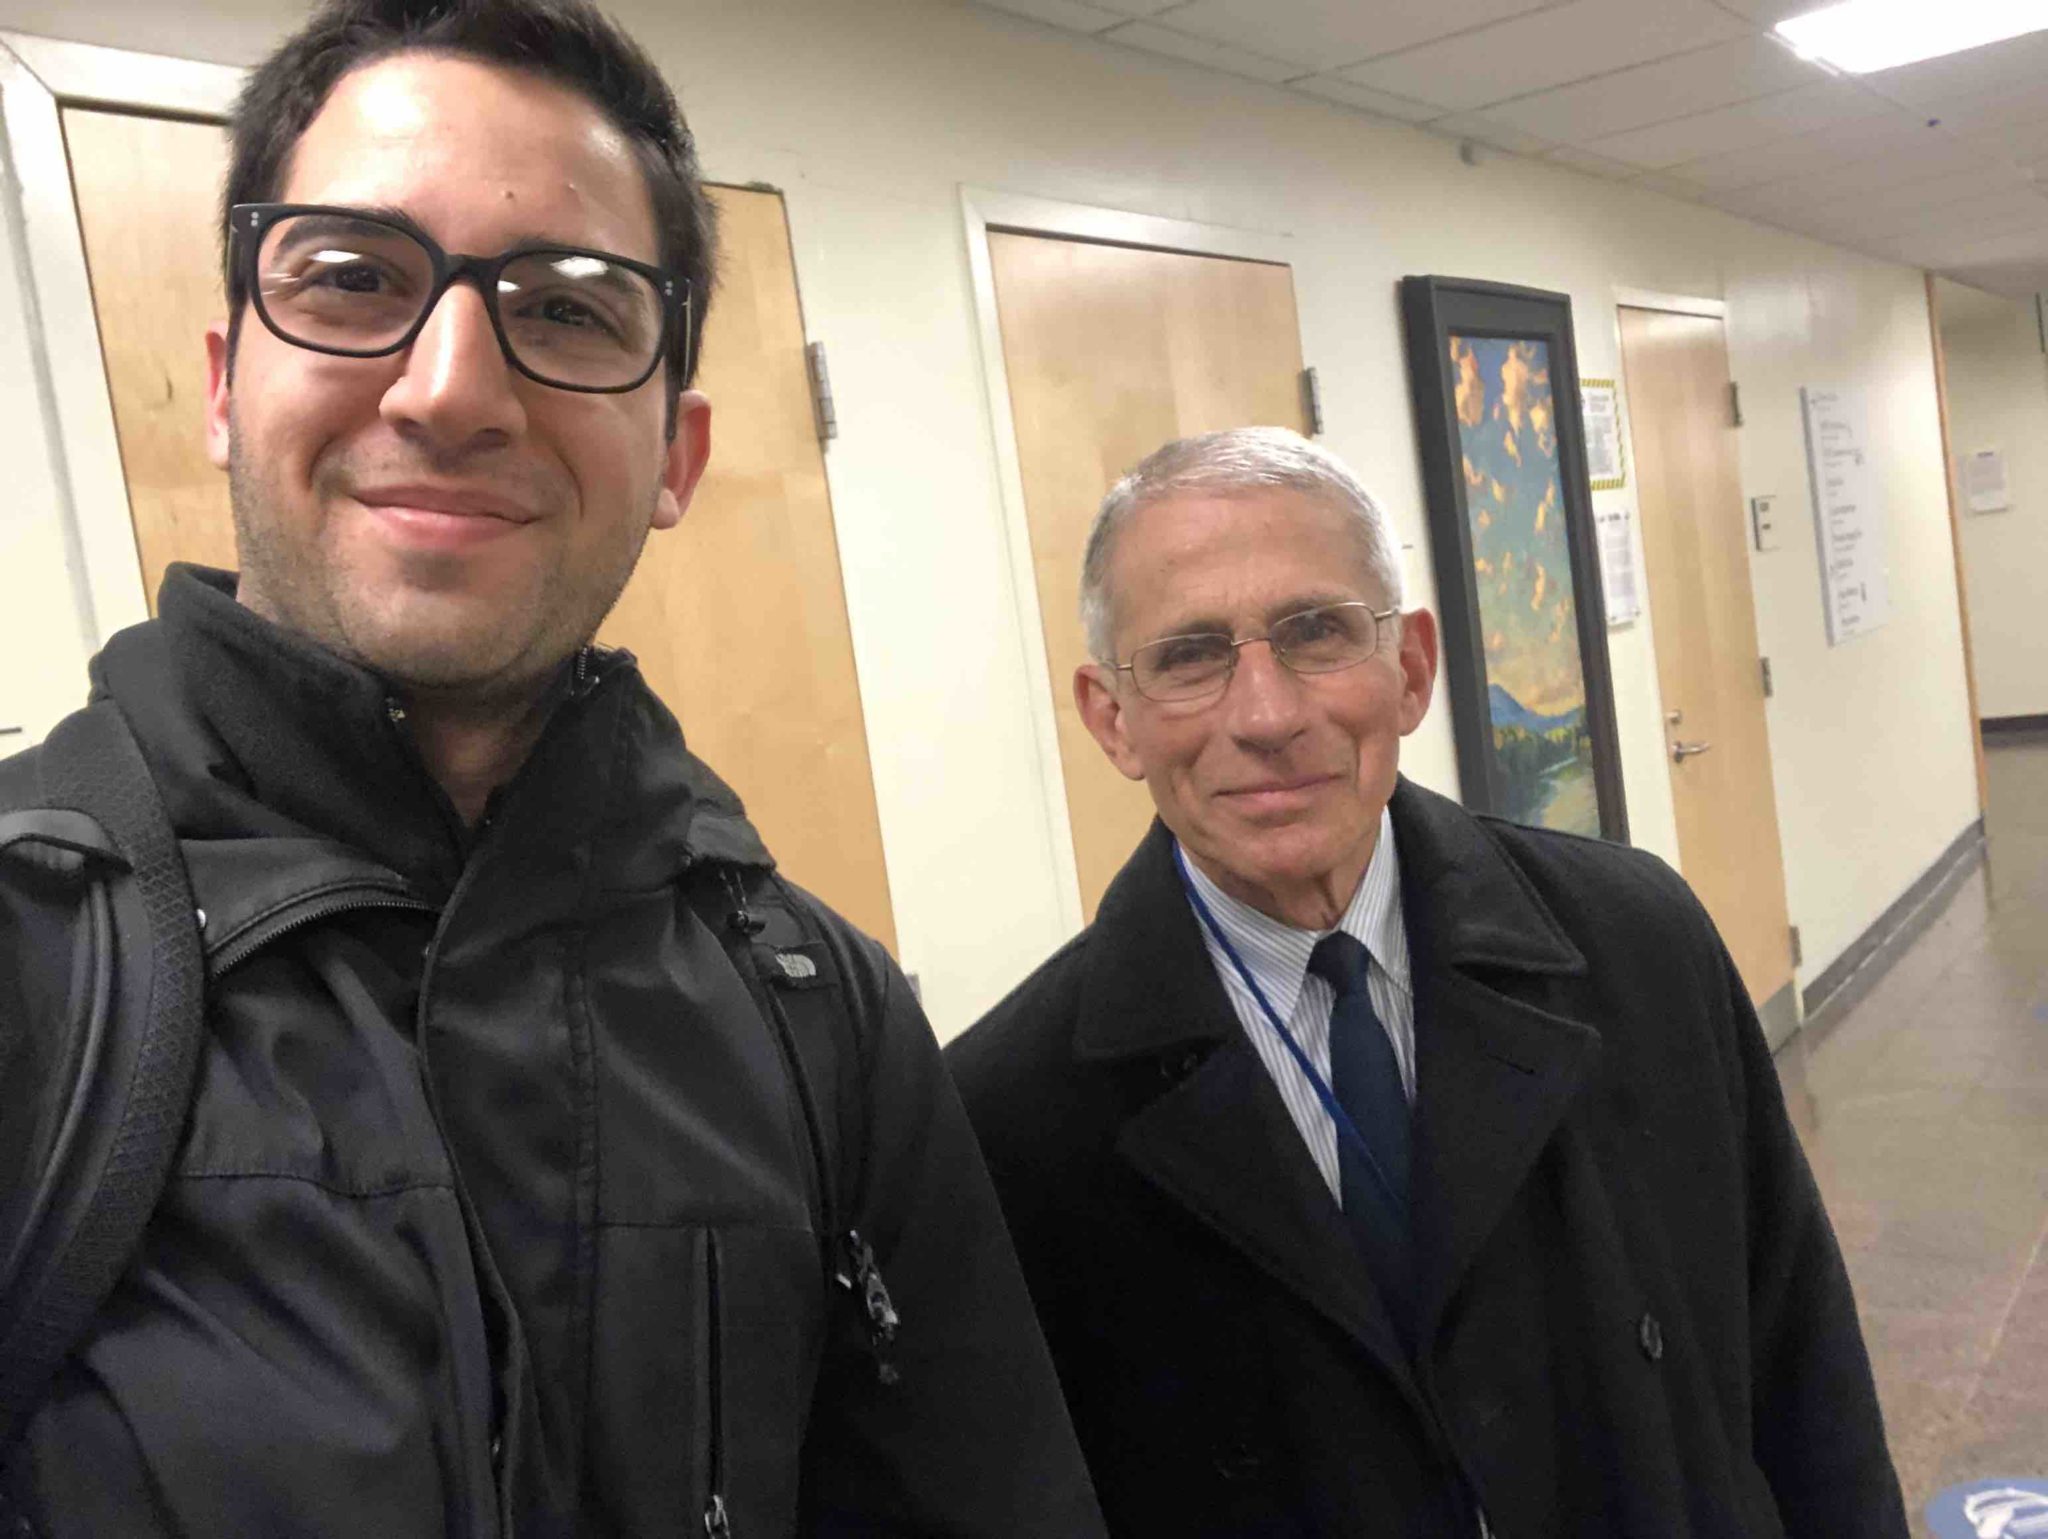 Mark Shapses and Dr. Fauci pose for a selfie